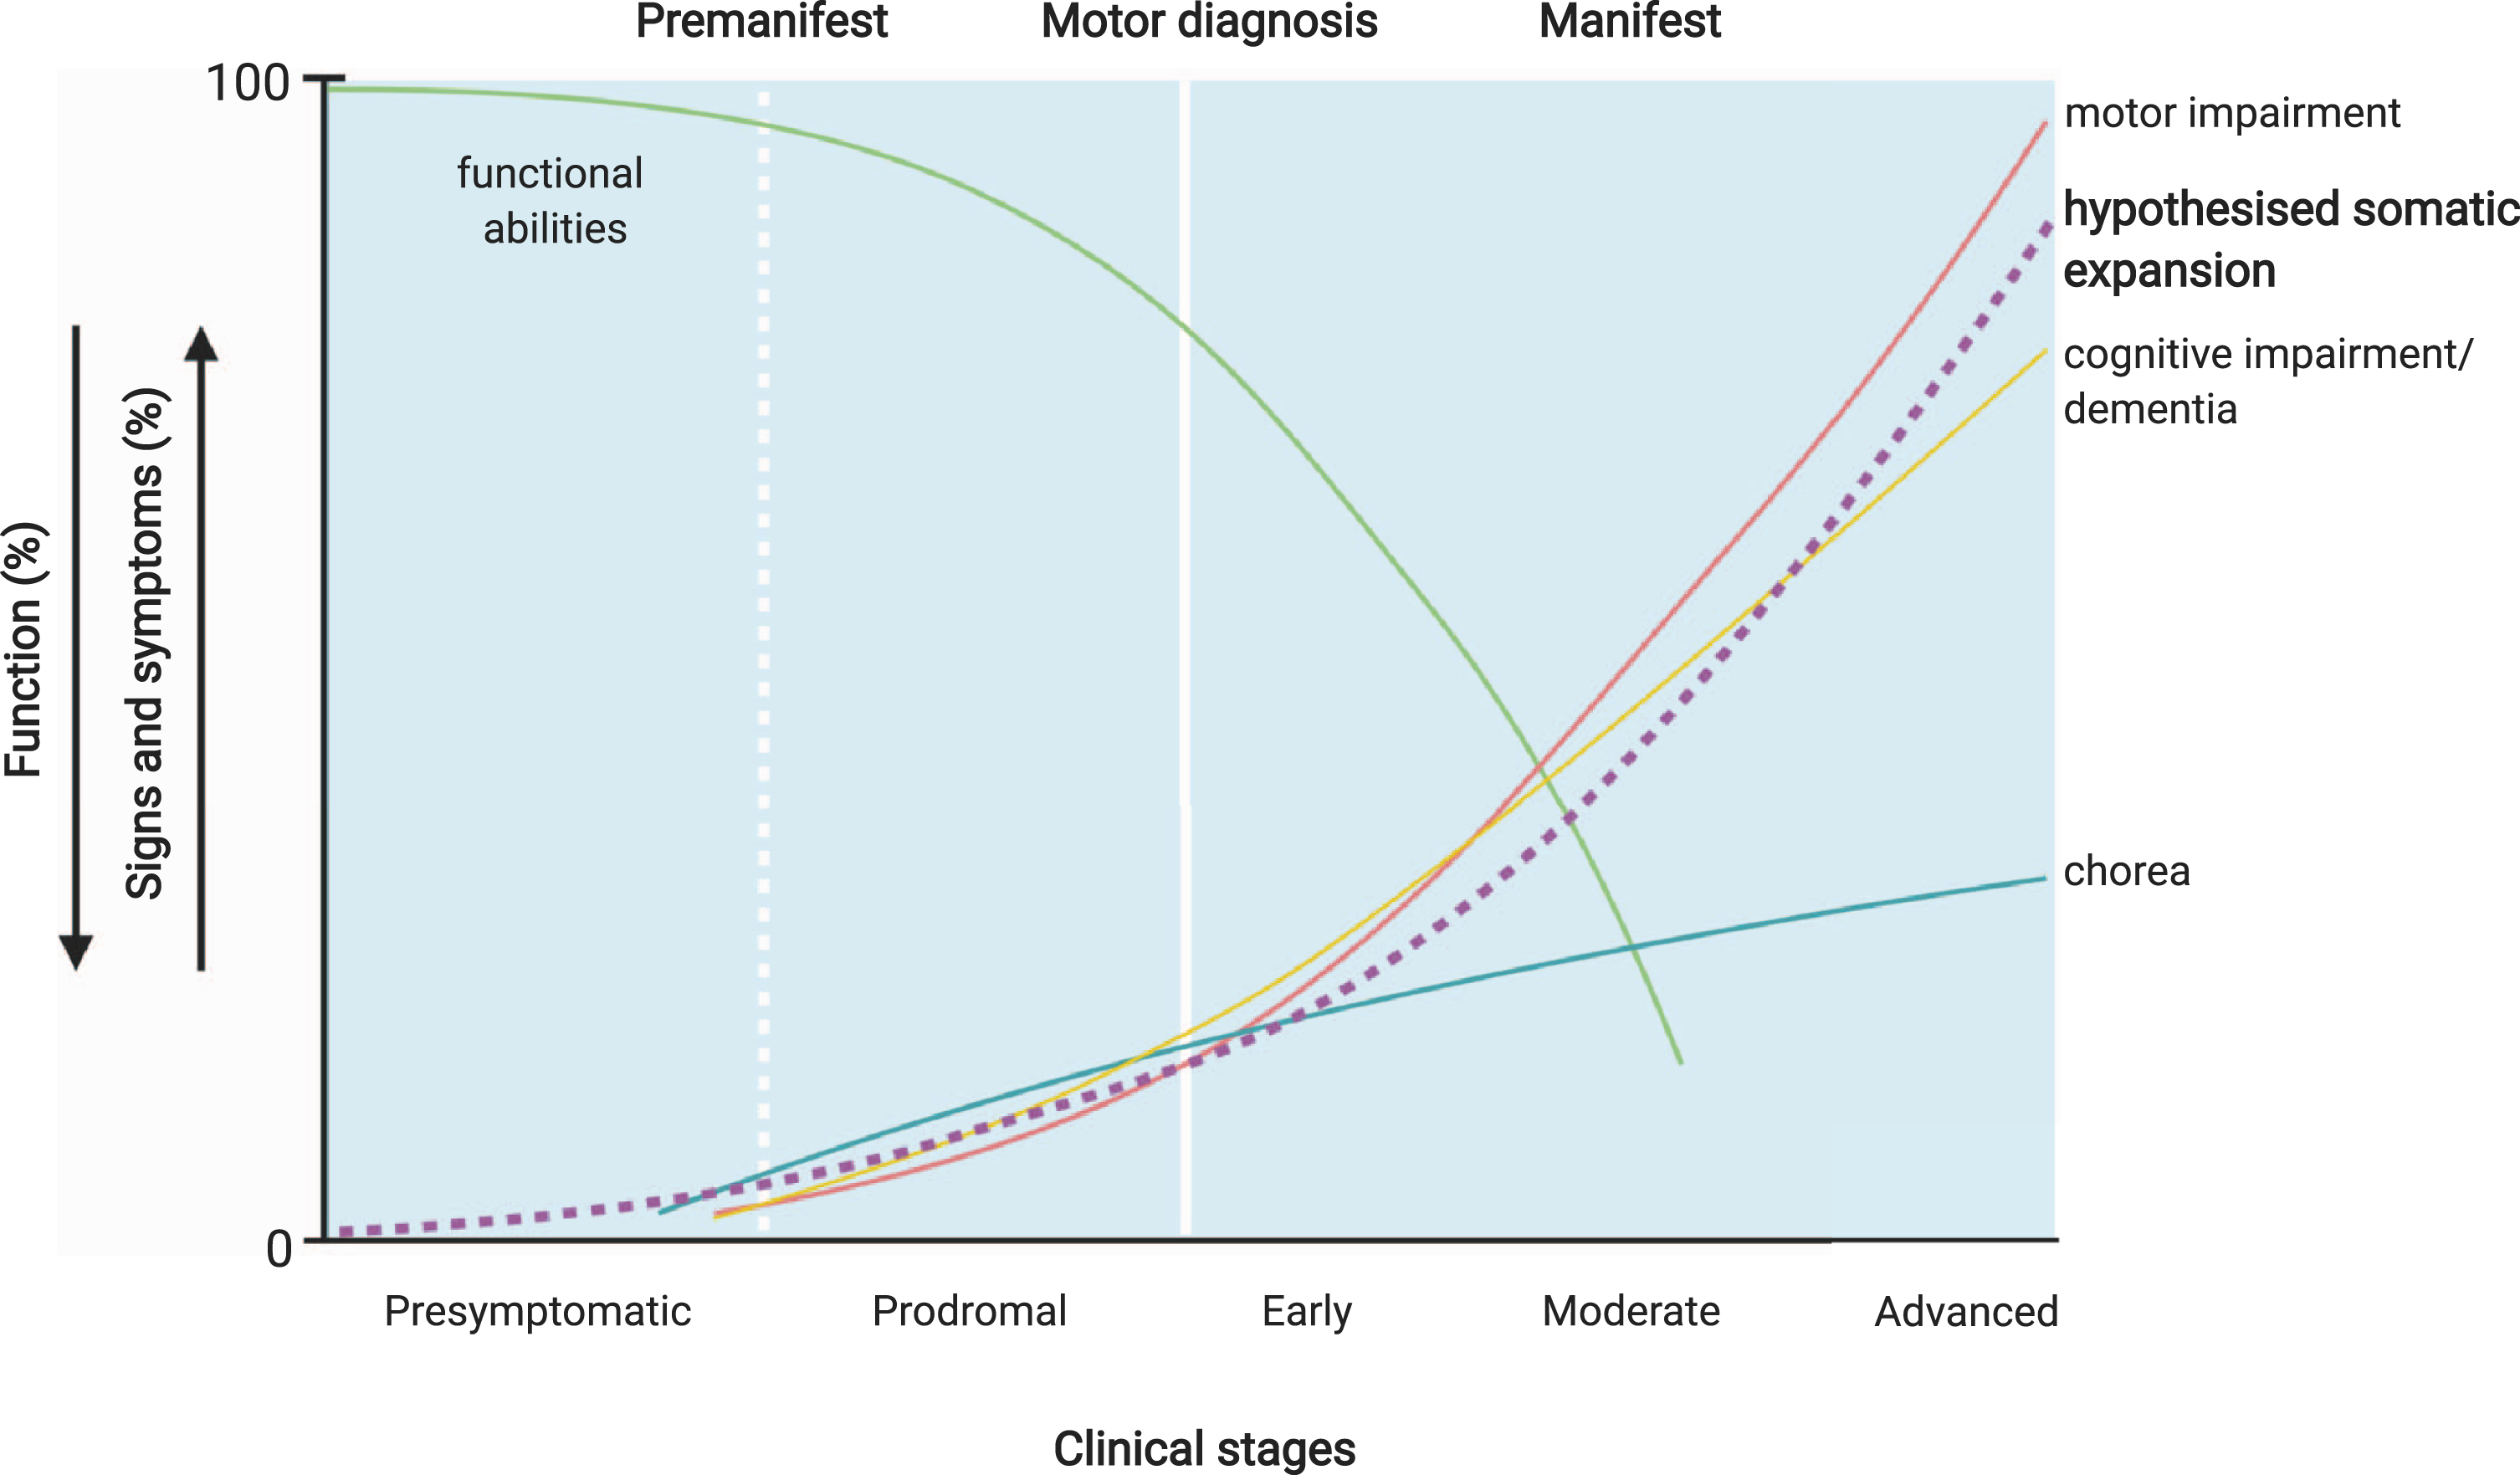 Potential relationship of CAG tract expansion and clinical Huntington’s disease events. The premanifest period of the disease may reflect the presence of a proportion of disease-relevant cells with sufficient somatic expansion to induce neuronal dysfunction, but too few to manifest overt clinical symptoms. Premanifest HD includes a presymptomatic period where no signs or symptoms are present, and prodromal HD, characterised by the onset of subtle signs and symptoms, which may be the result of the HTT CAG length expanding beyond an unknown pathogenic threshold in increasing numbers of disease-relevant cells. Manifest HD— characterised by chorea and gradual worsening of motor and cognitive difficulties— may then arise once a significant number of disease-relevant cells have passed this threshold. Somatic expansion in susceptible cell populations is likely to be occurring throughout the premanifest and prodromal stages of disease as indicated by the hypothetical dashed line, although the actual trajectory of this expansion will depend on the inherited repeat length and is likely to differ in different cell types. Therefore, the relationship between the trajectory of somatic expansion and clinical phenotypes is currently hypothetical. Figure adapted from Ross et al. [45] and Bates et al. [3] and created using BioRender.com.